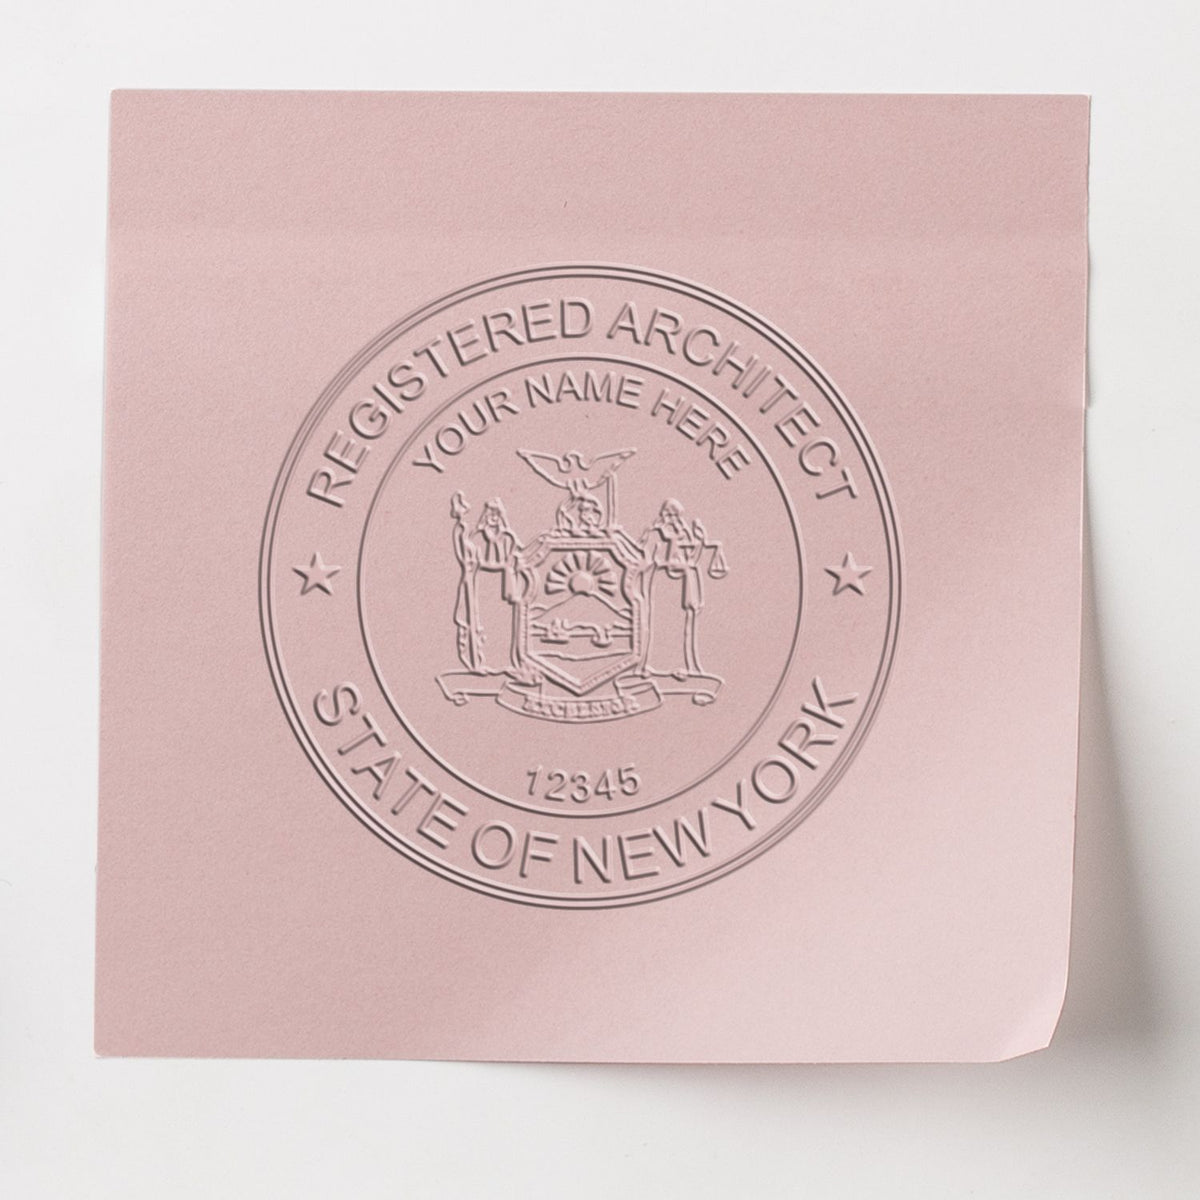 State of New York Long Reach Architectural Embossing Seal in use photo showing a stamped imprint of the State of New York Long Reach Architectural Embossing Seal